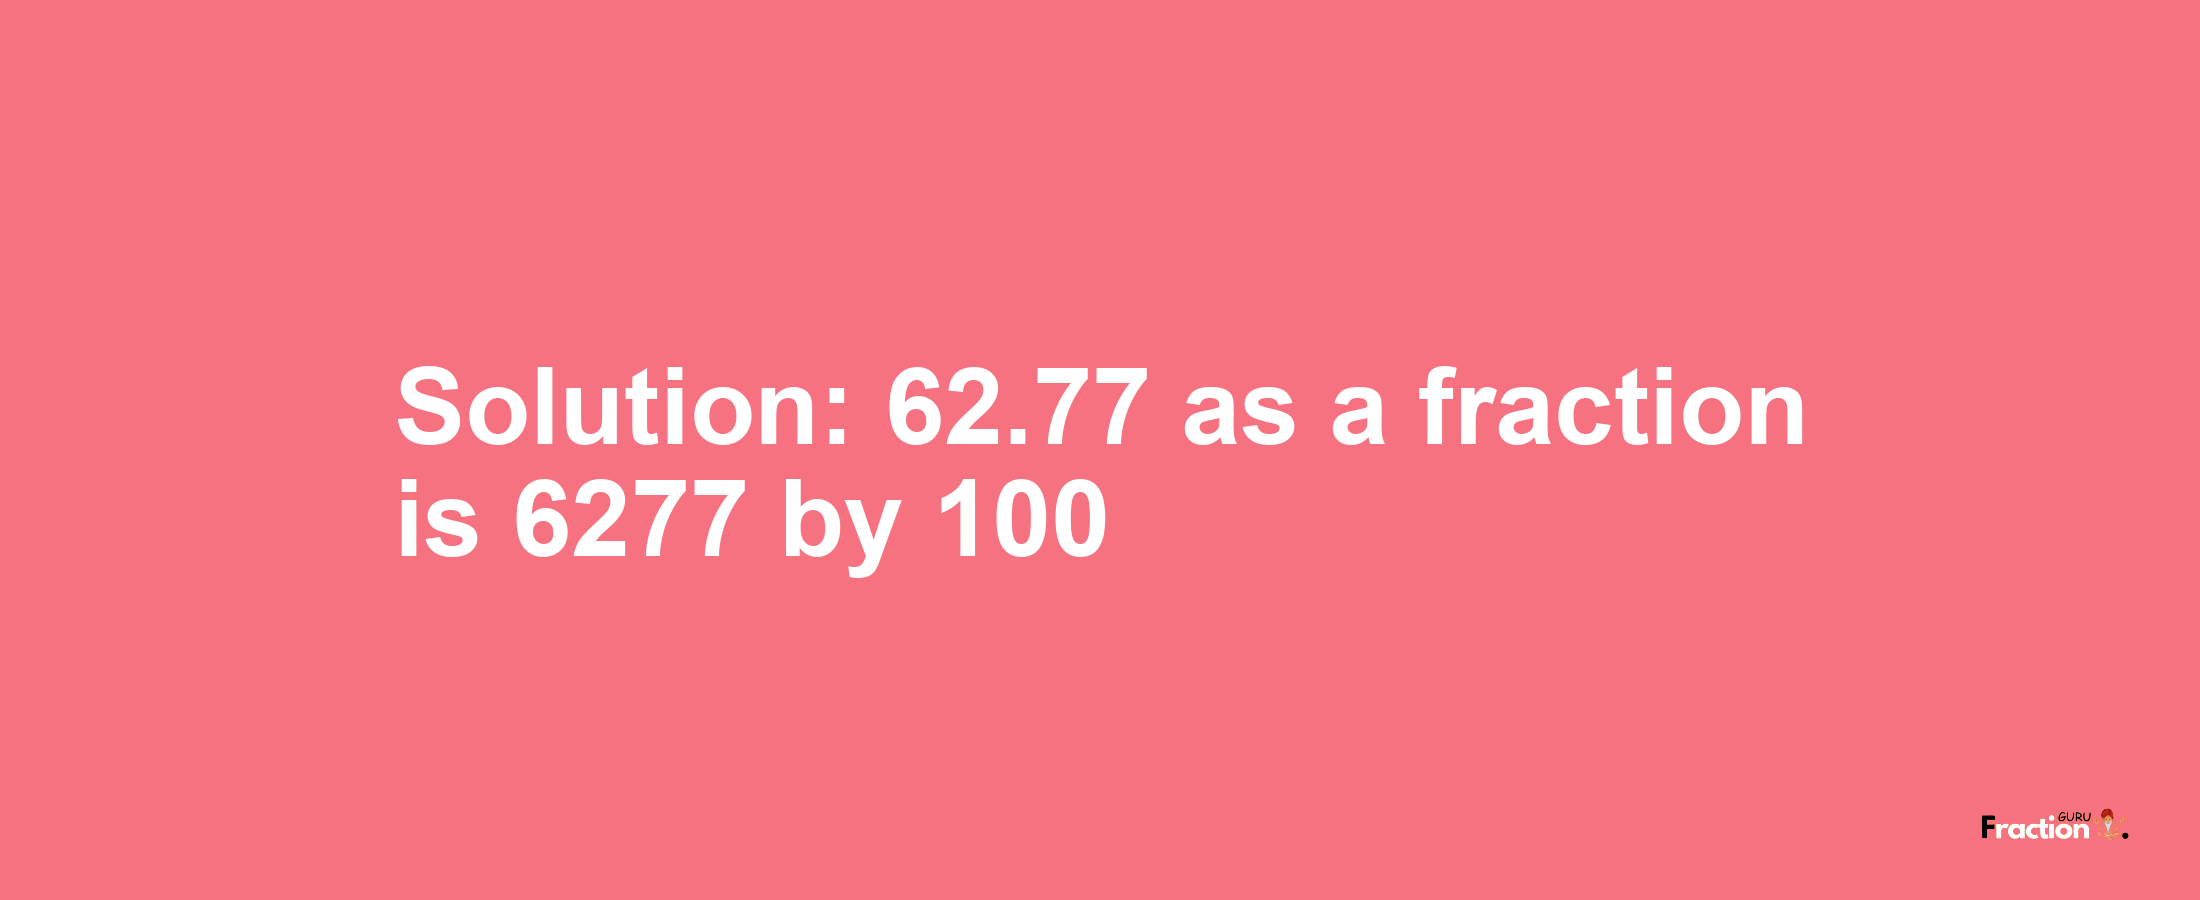 Solution:62.77 as a fraction is 6277/100